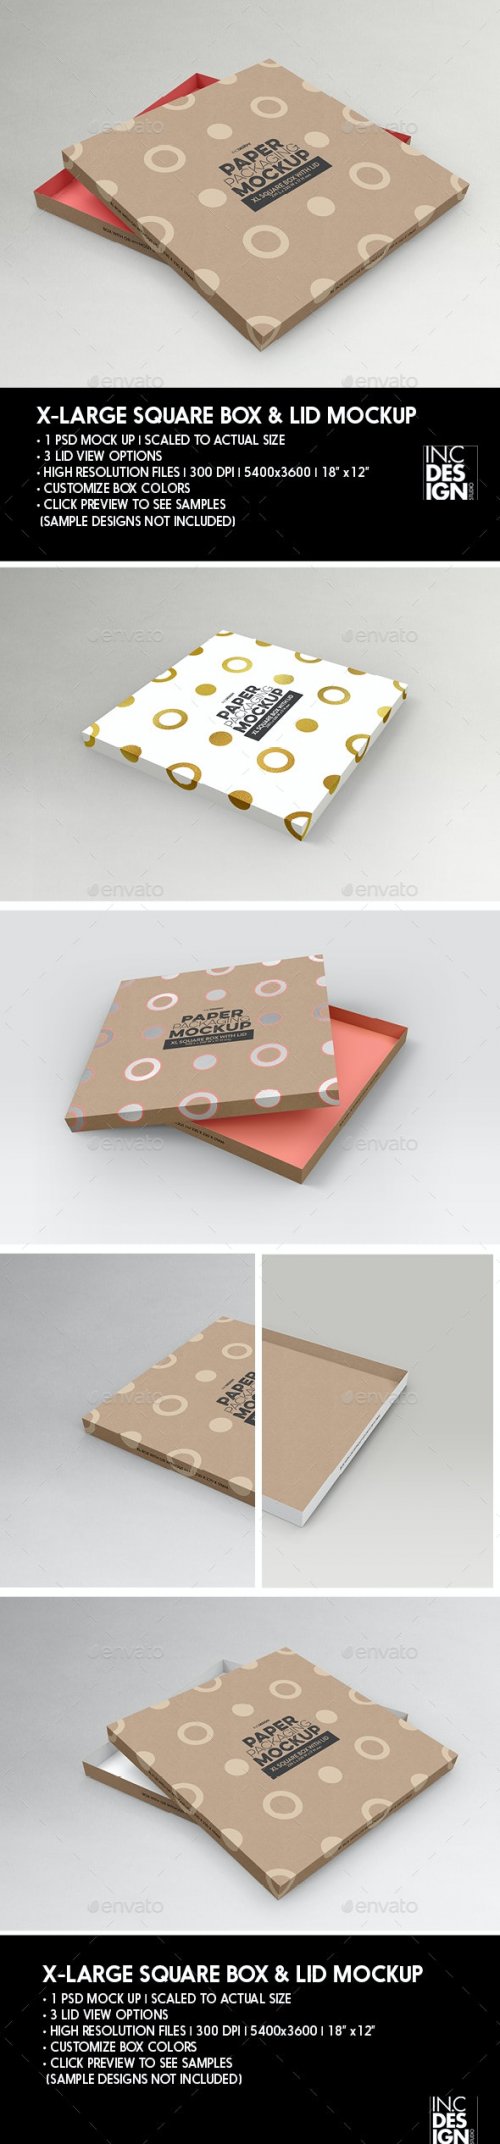 Paper XL Square Box and Lid Packaging Mockup